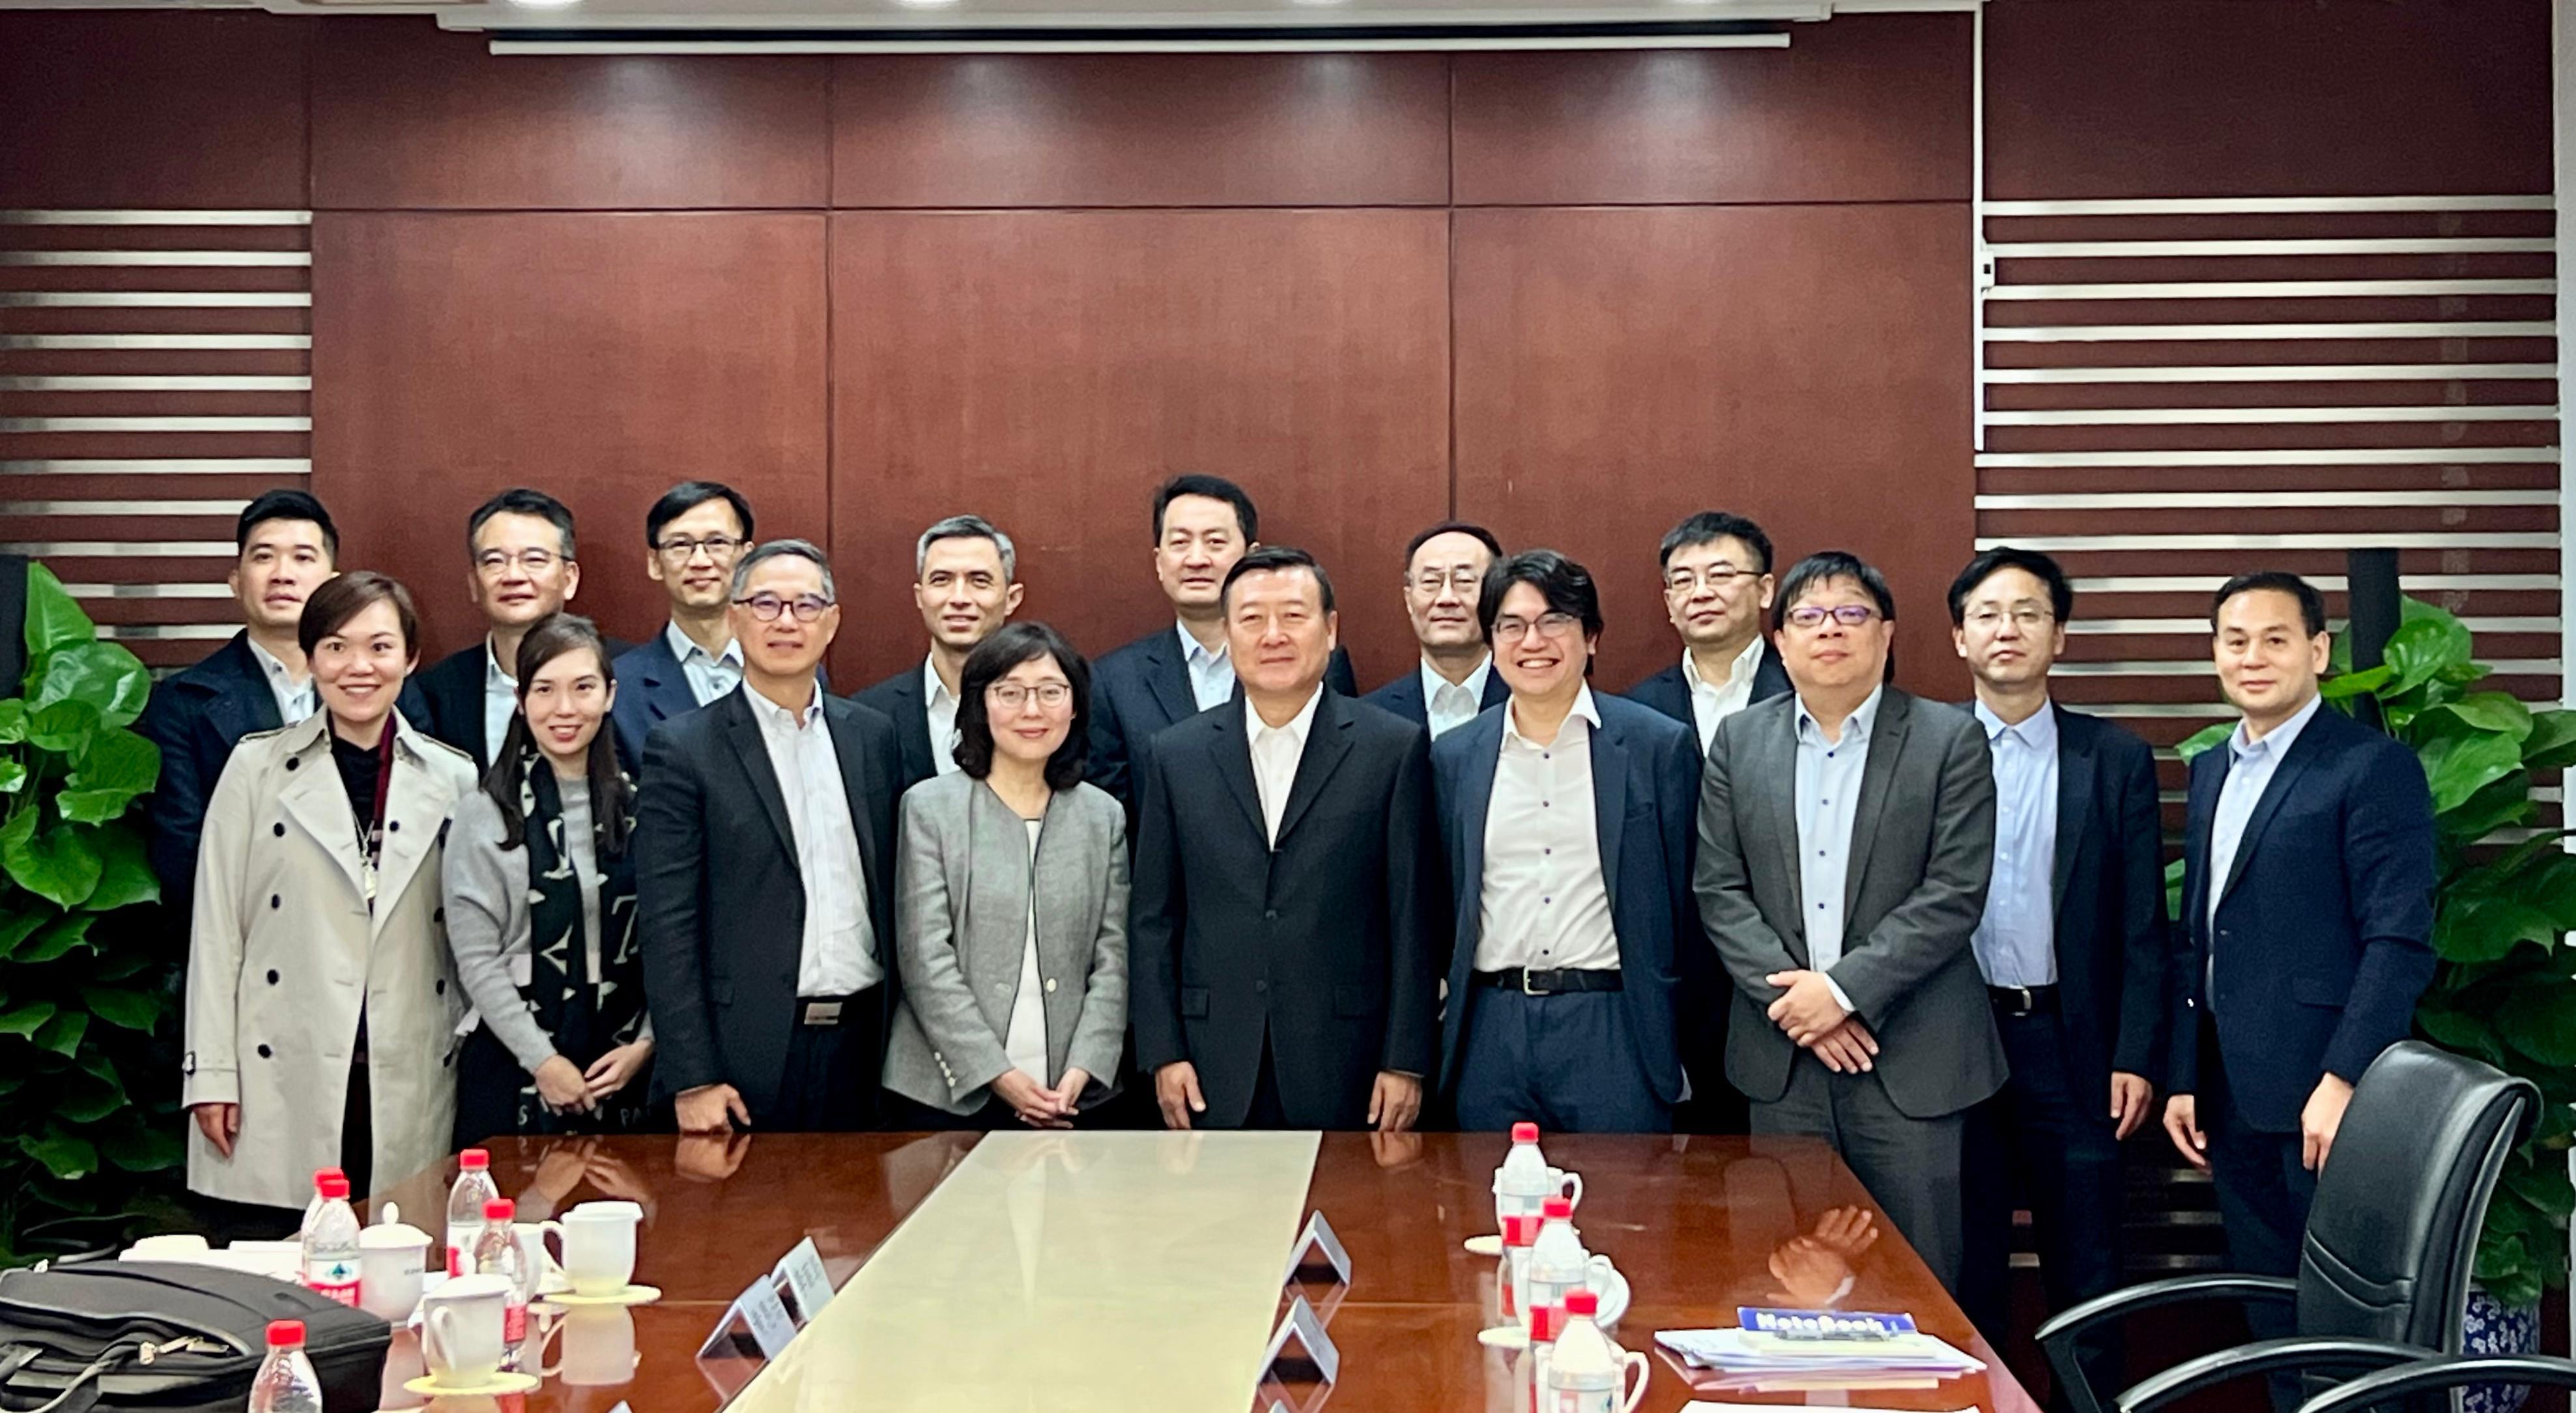 The Secretary for Development, Ms Bernadette Linn (front row, fourth left), started her visit programme to Beijing today (November 8) and met with the Minister of Housing and Urban-Rural Development, Mr Ni Hong (front row, third right).